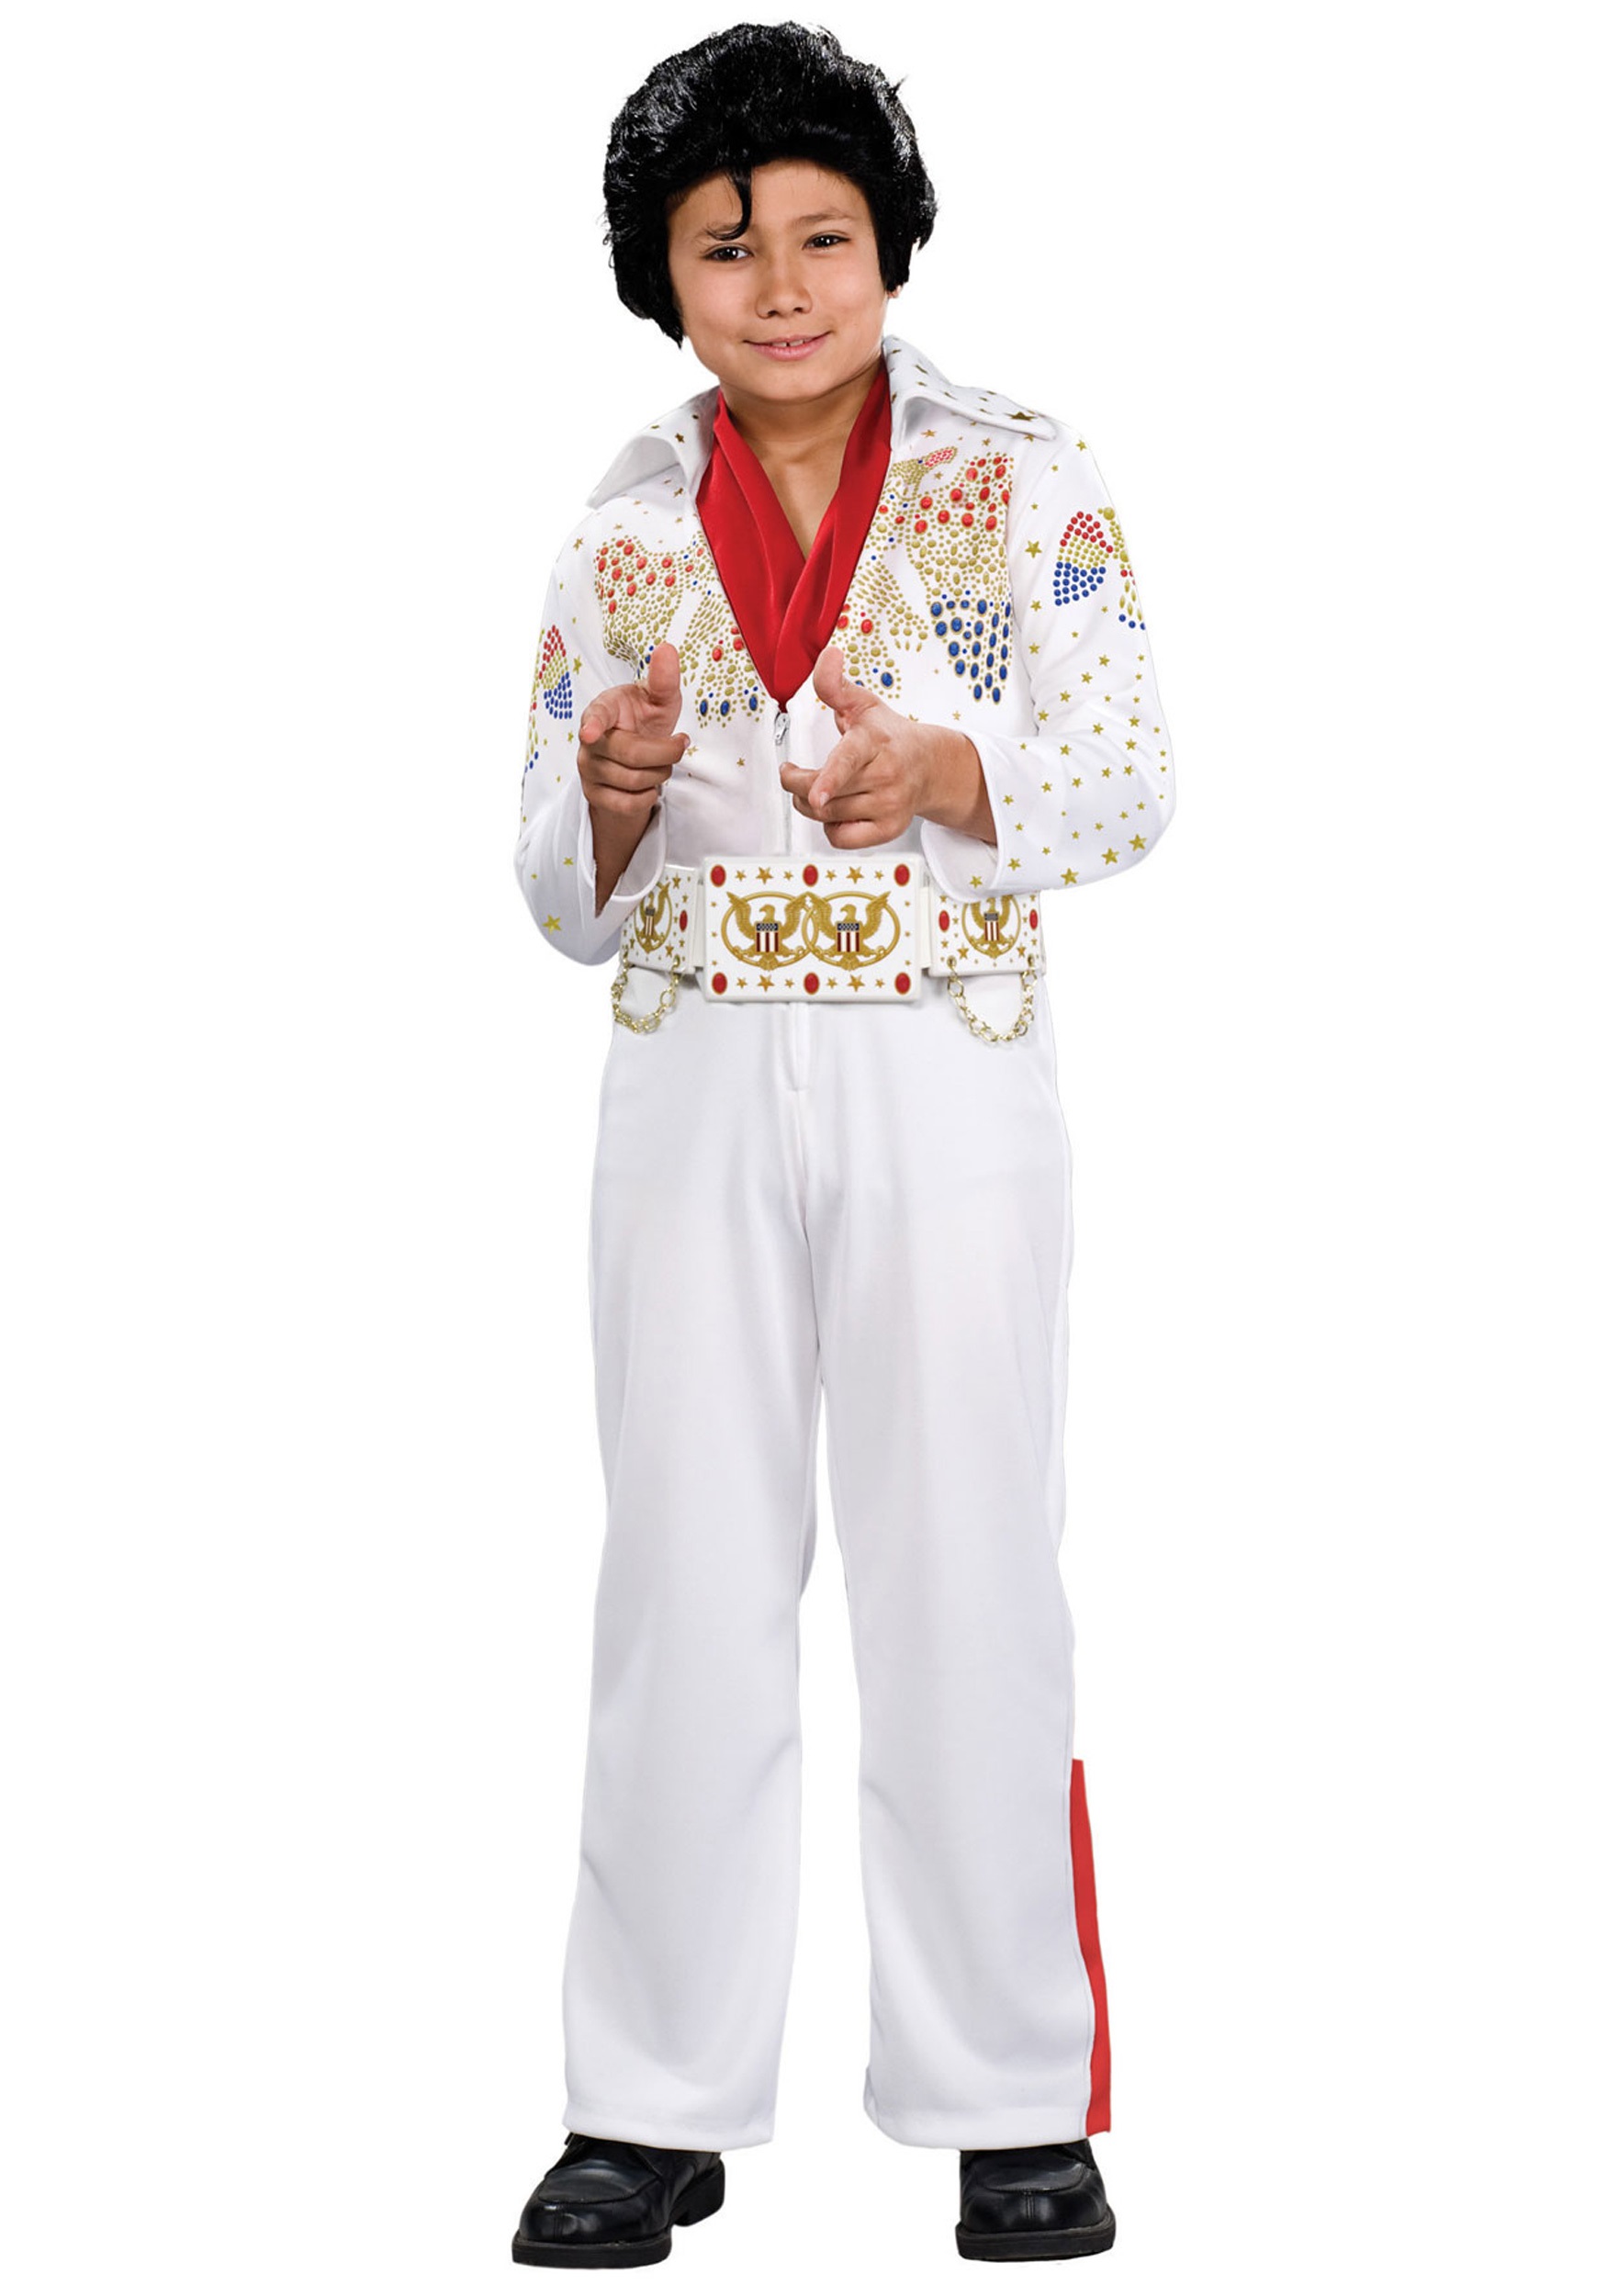 Deluxe Child Elvis Costume For A Toddler